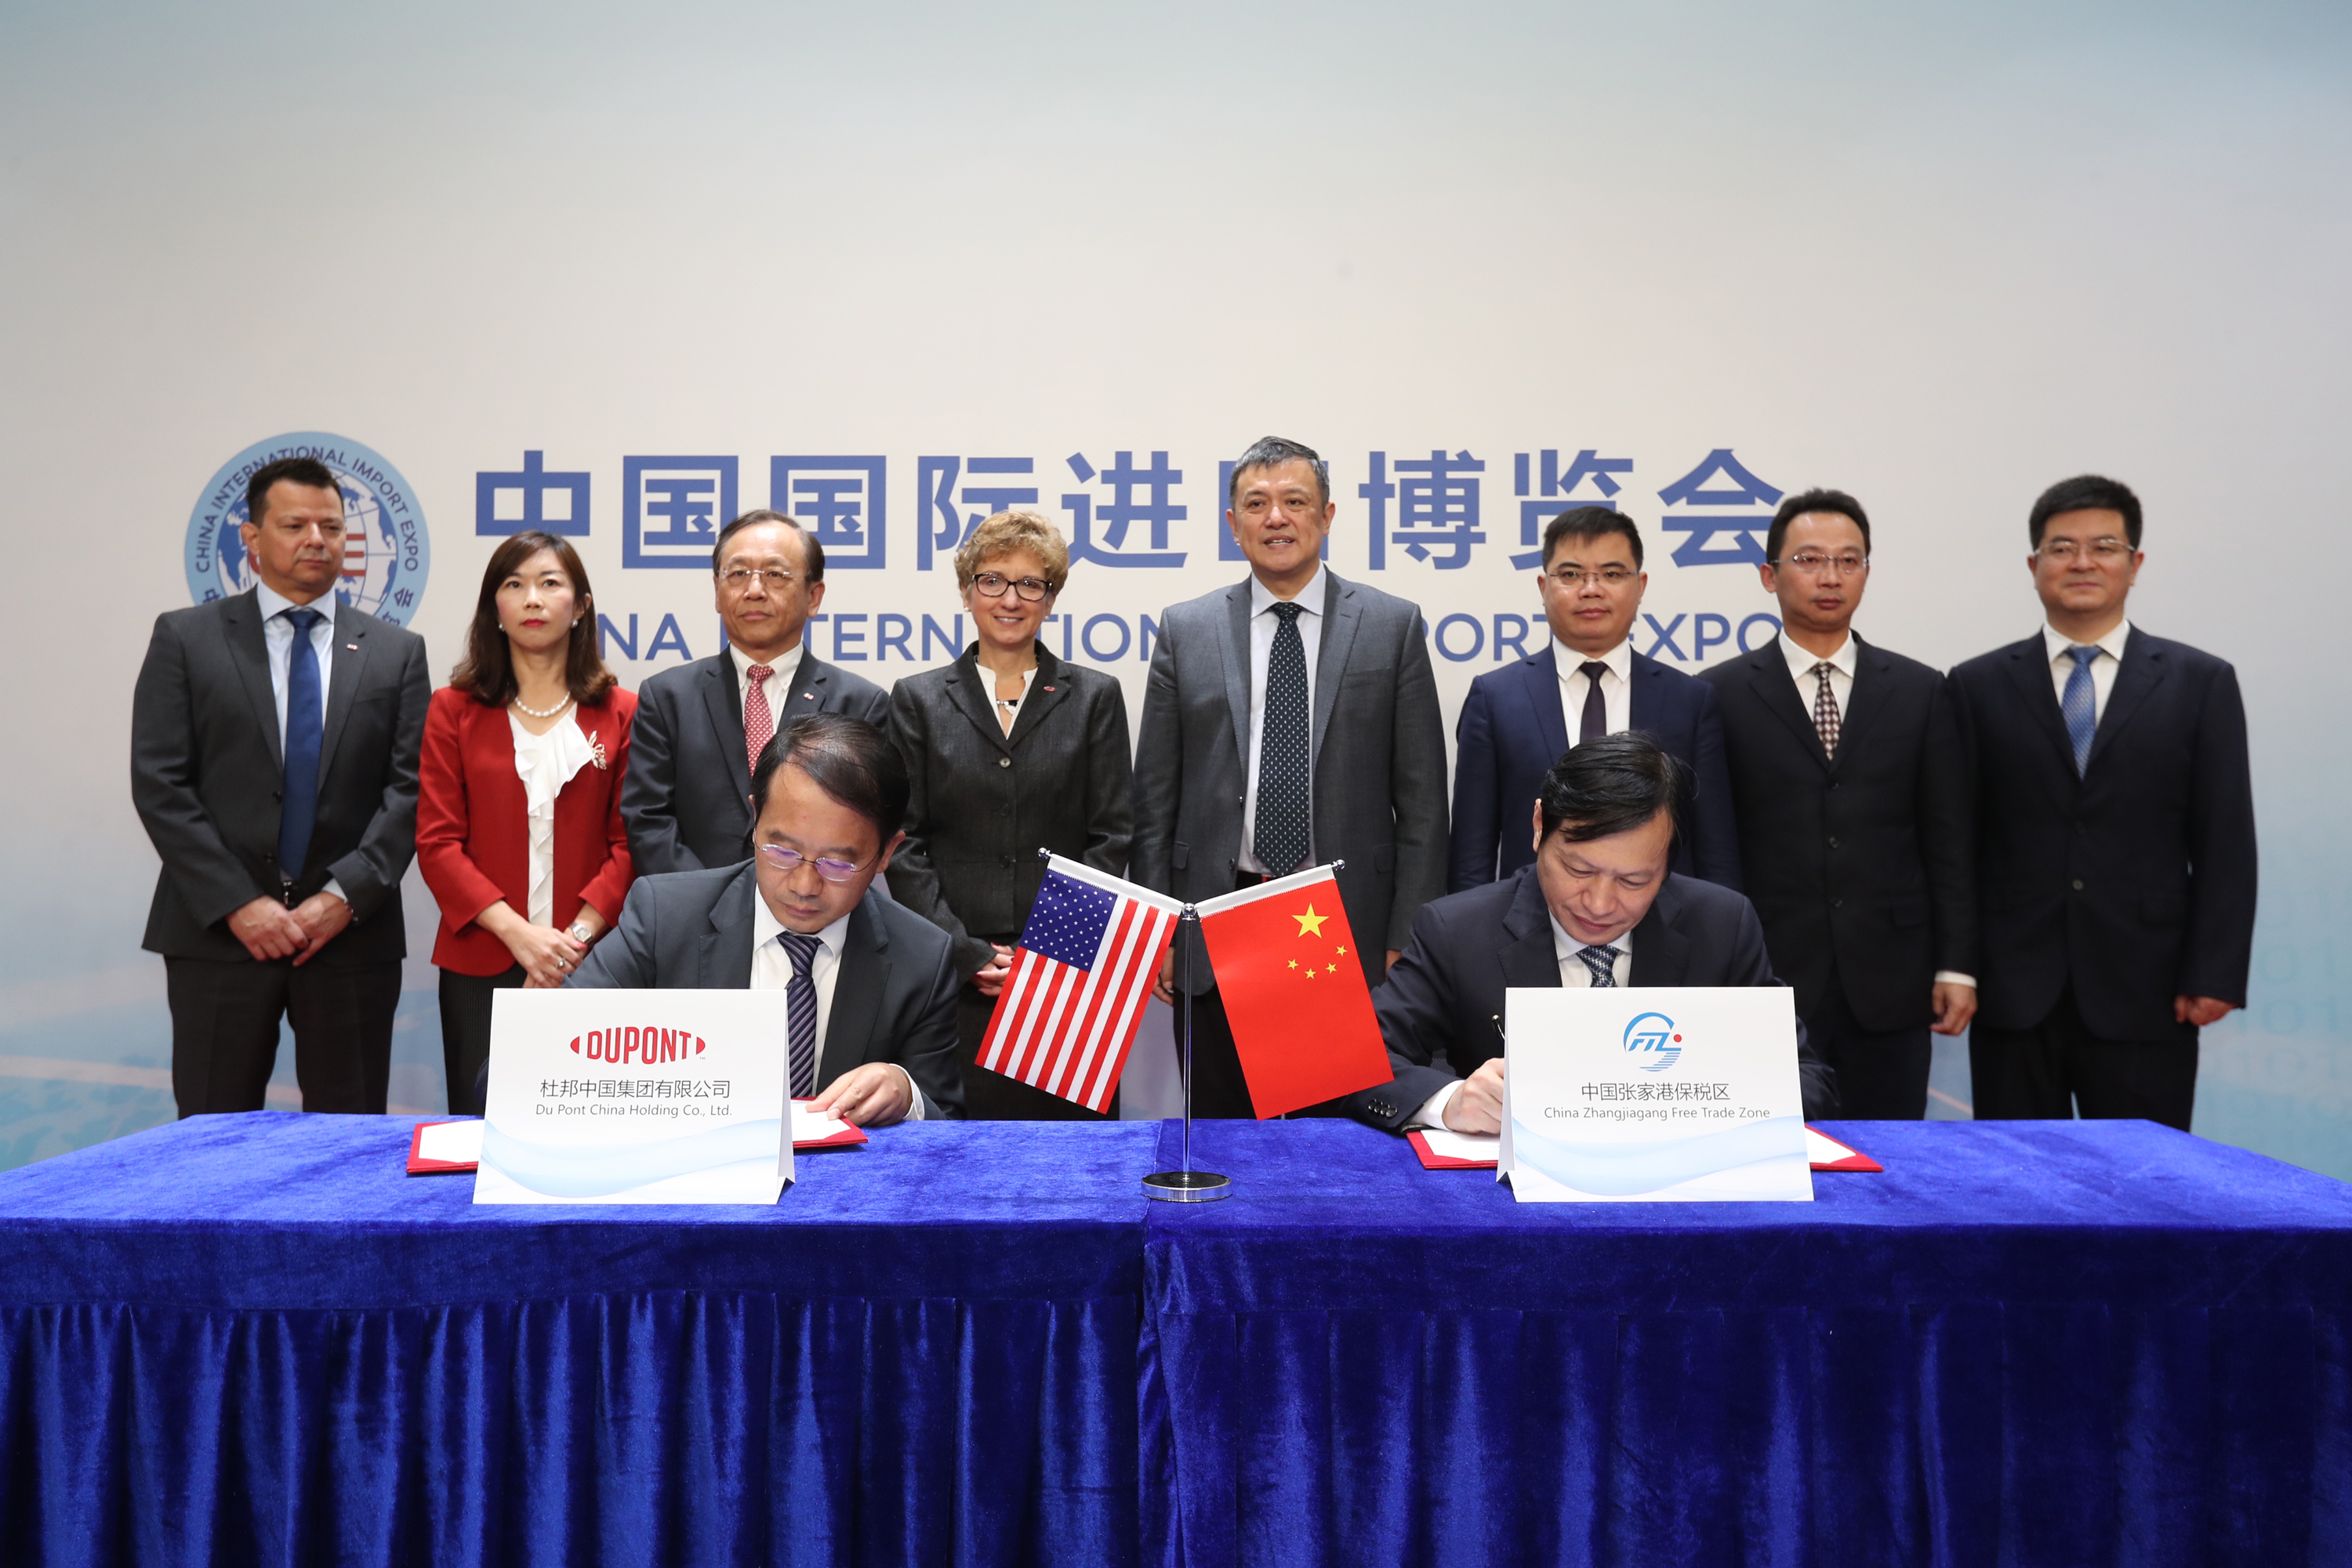 Signing ceremony of DuPont specialty materials facility in East China